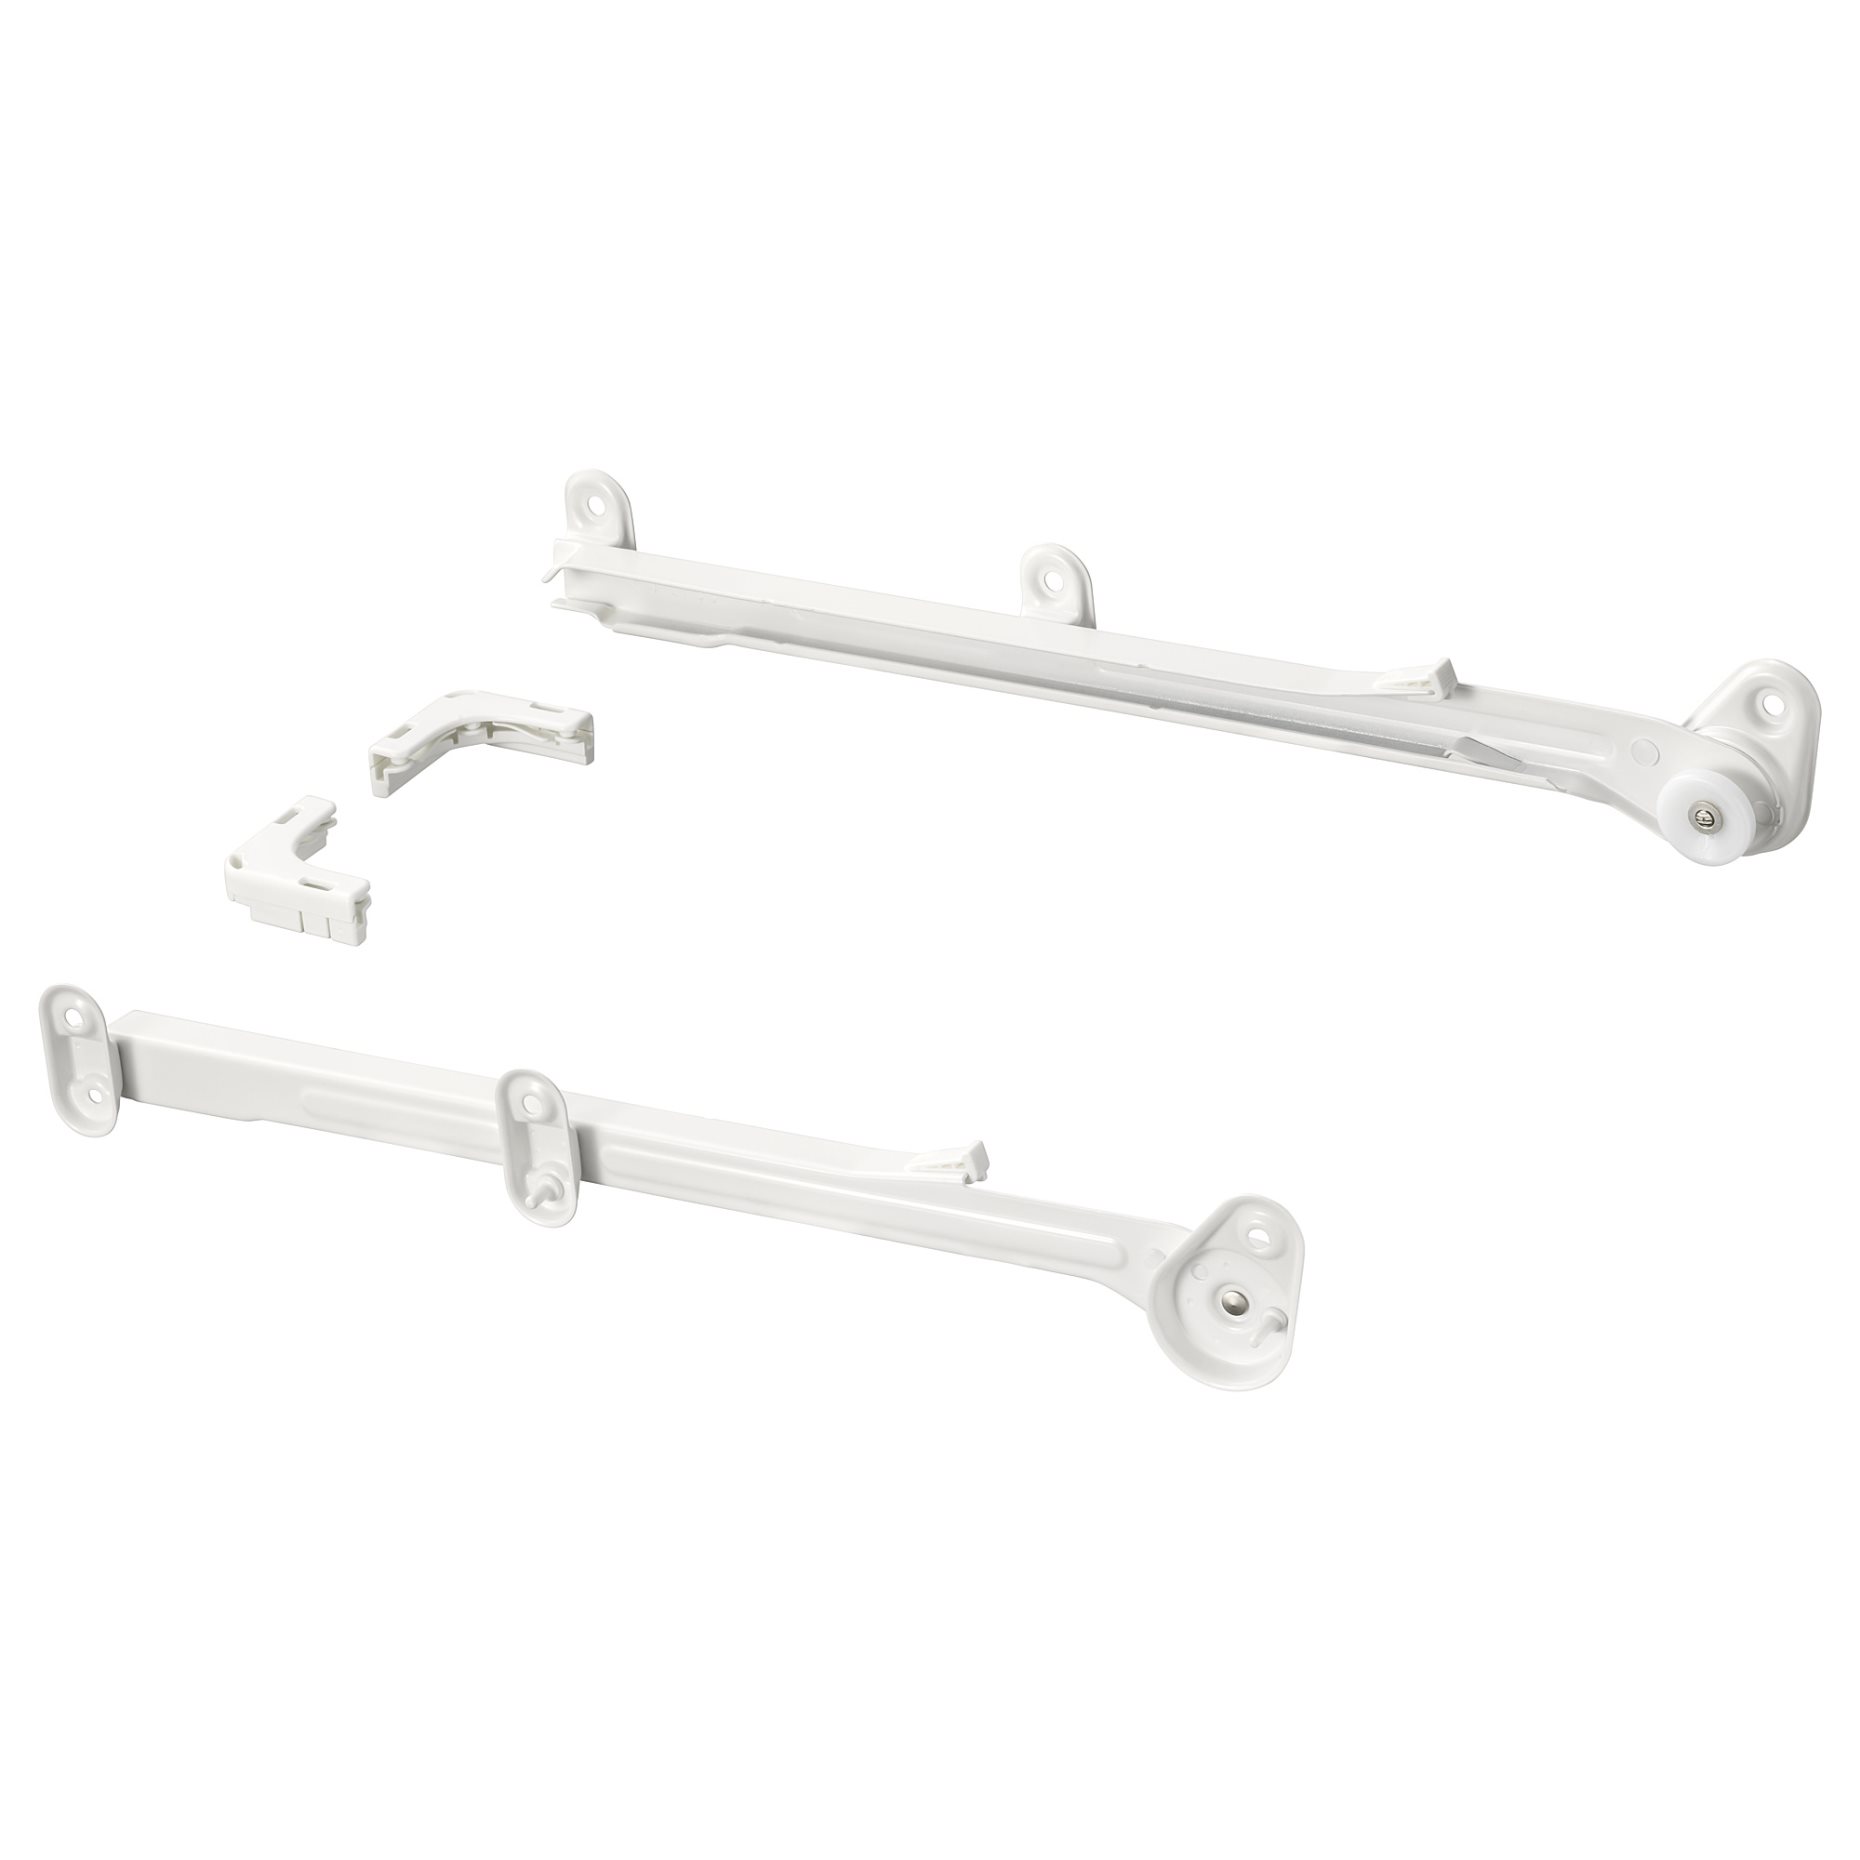 HJALPA, pull-out rail for baskets, 303.311.93